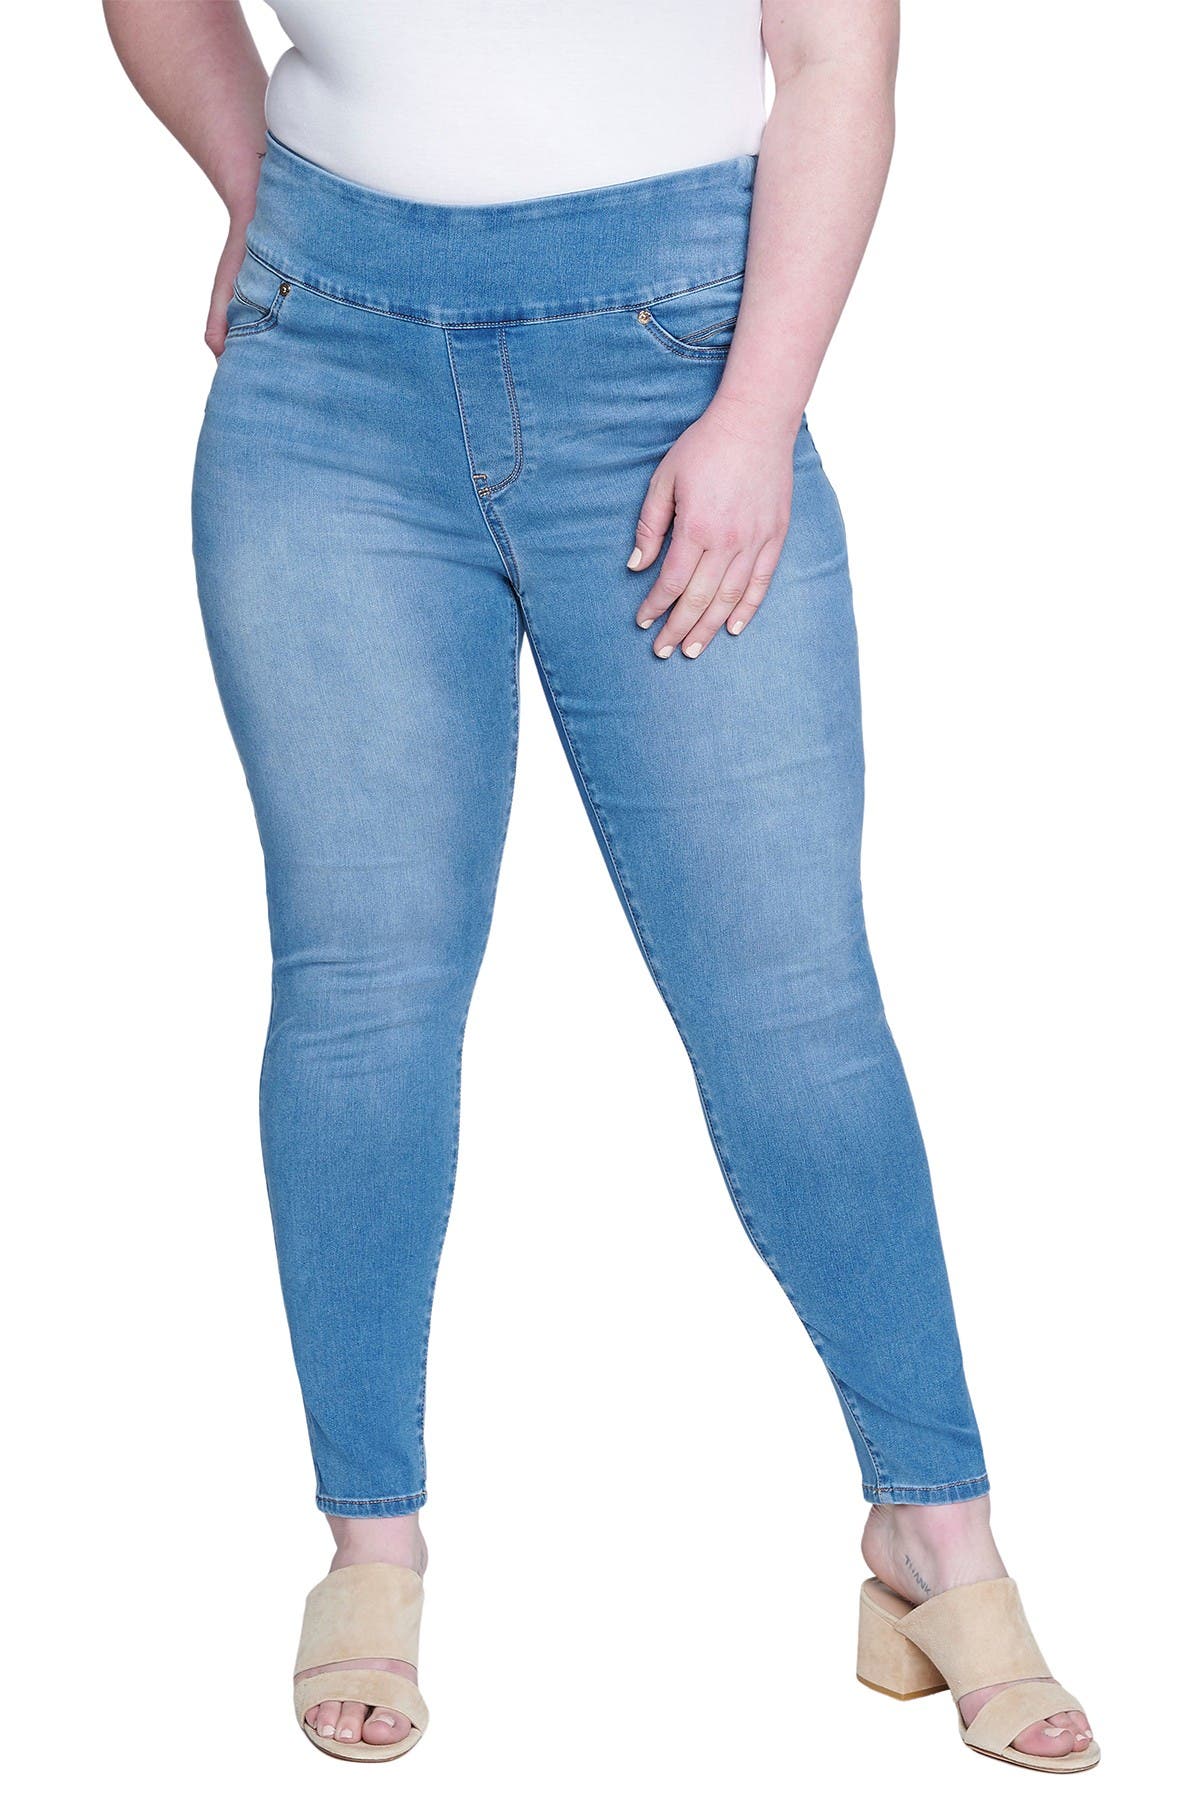 7 for all mankind plus size